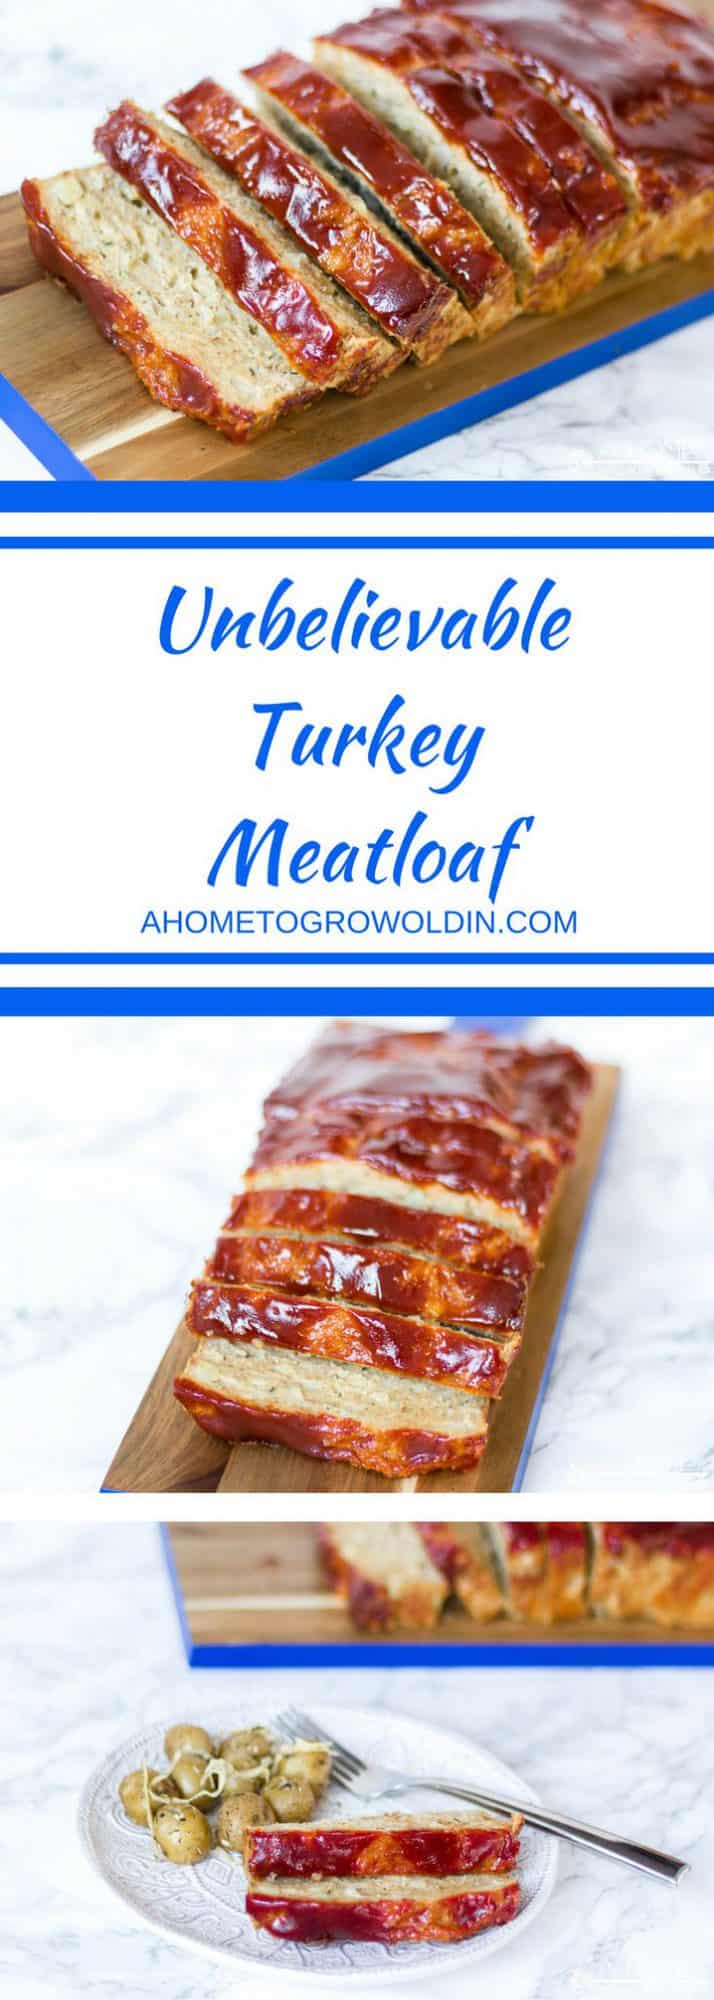 This kid-friendly turkey meatloaf recipe will be a huge dinner favorite! It's so easy and healthy! Try it tonight!